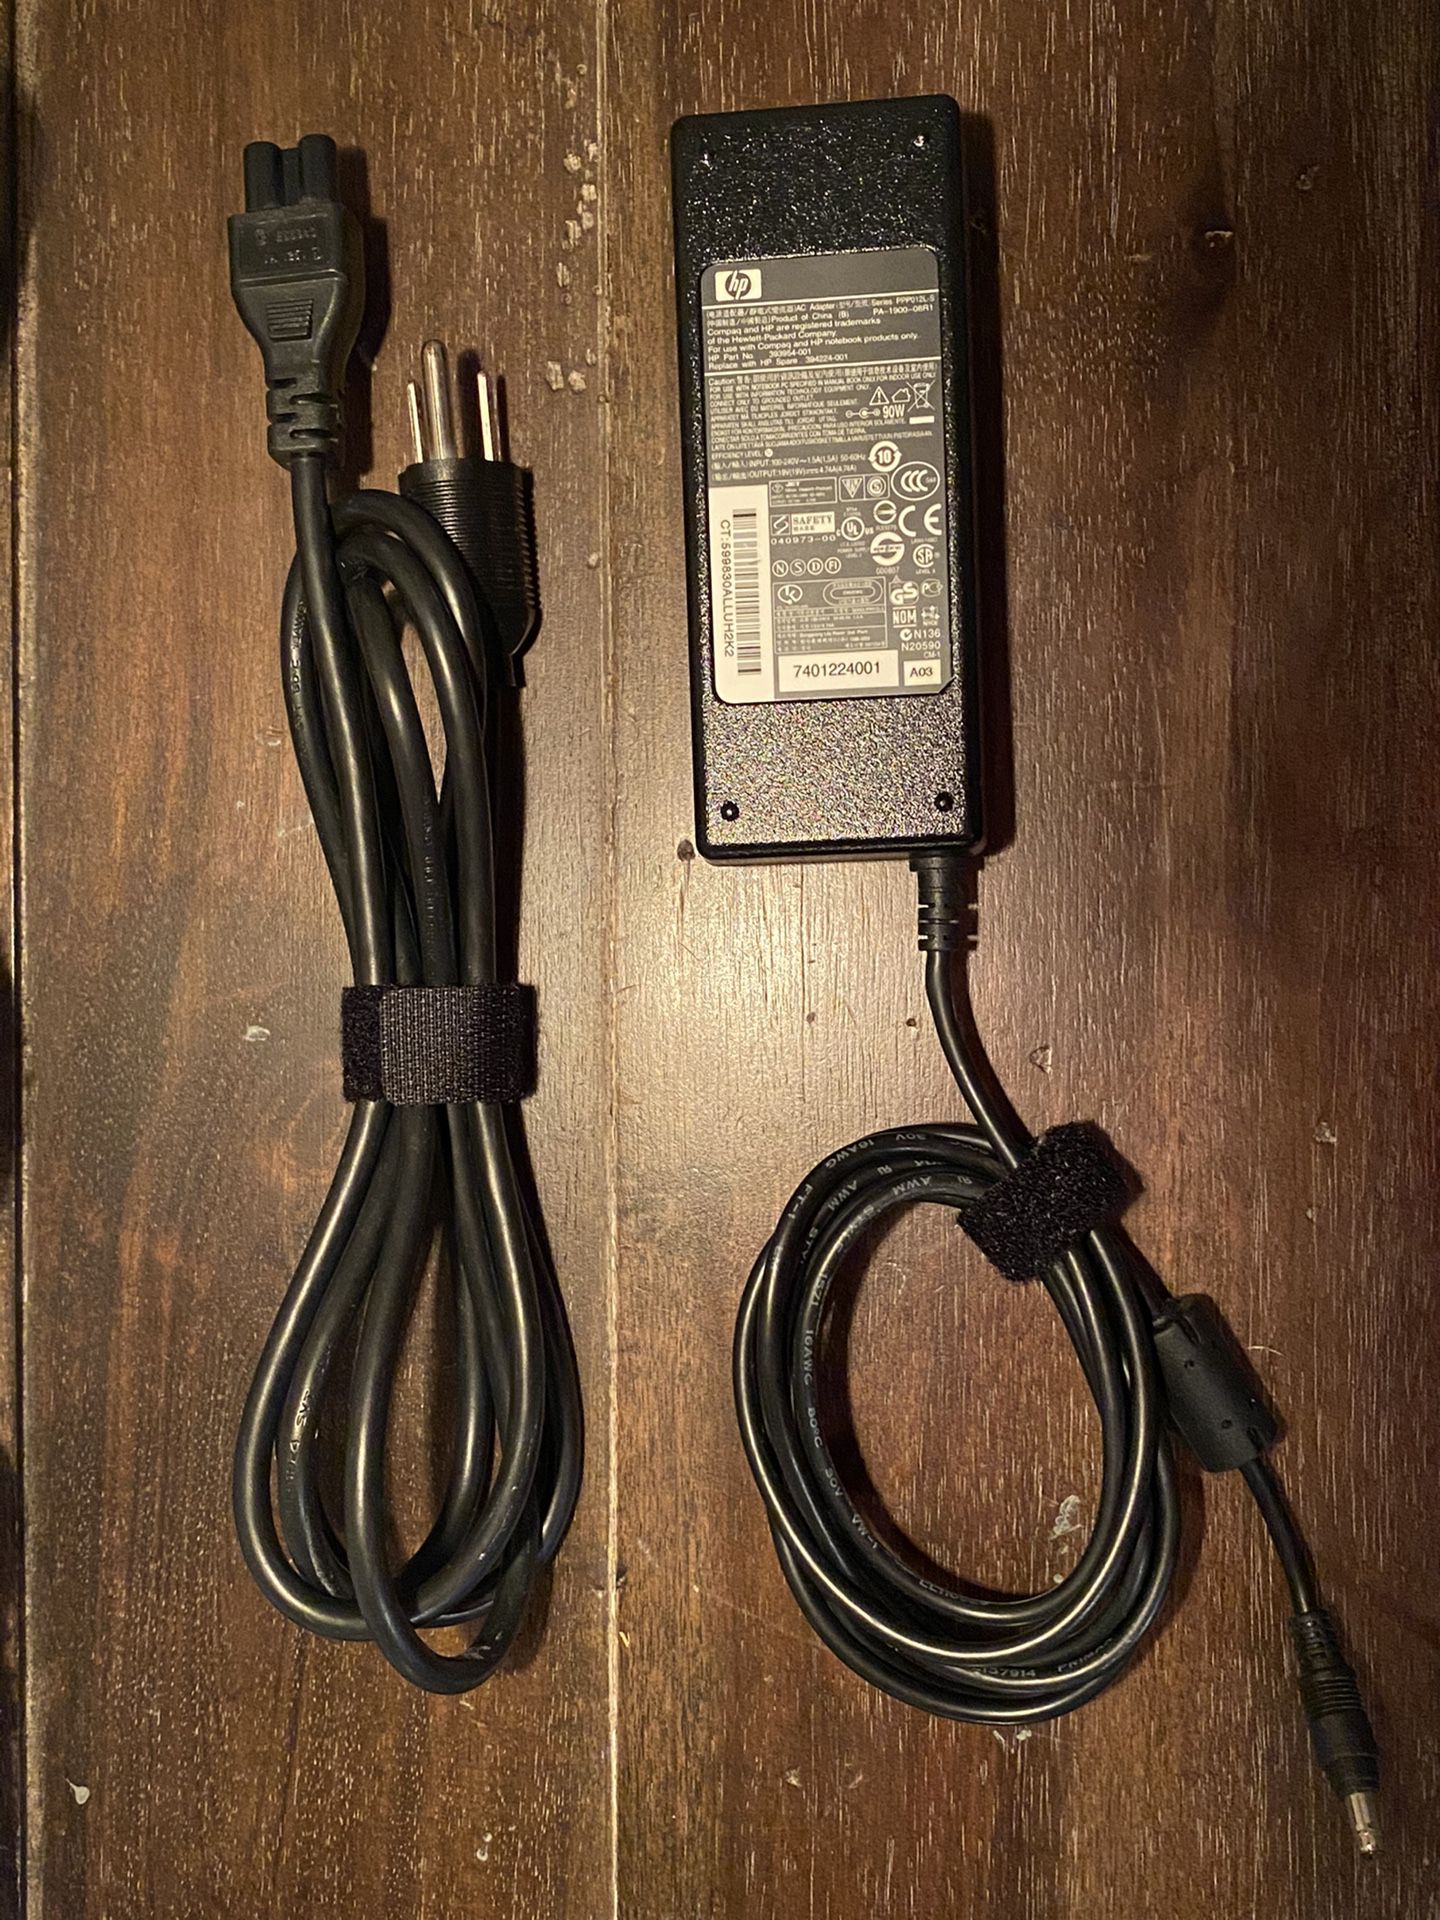 HP Laptop Charger - 19V for HP Compaq and Notebook series